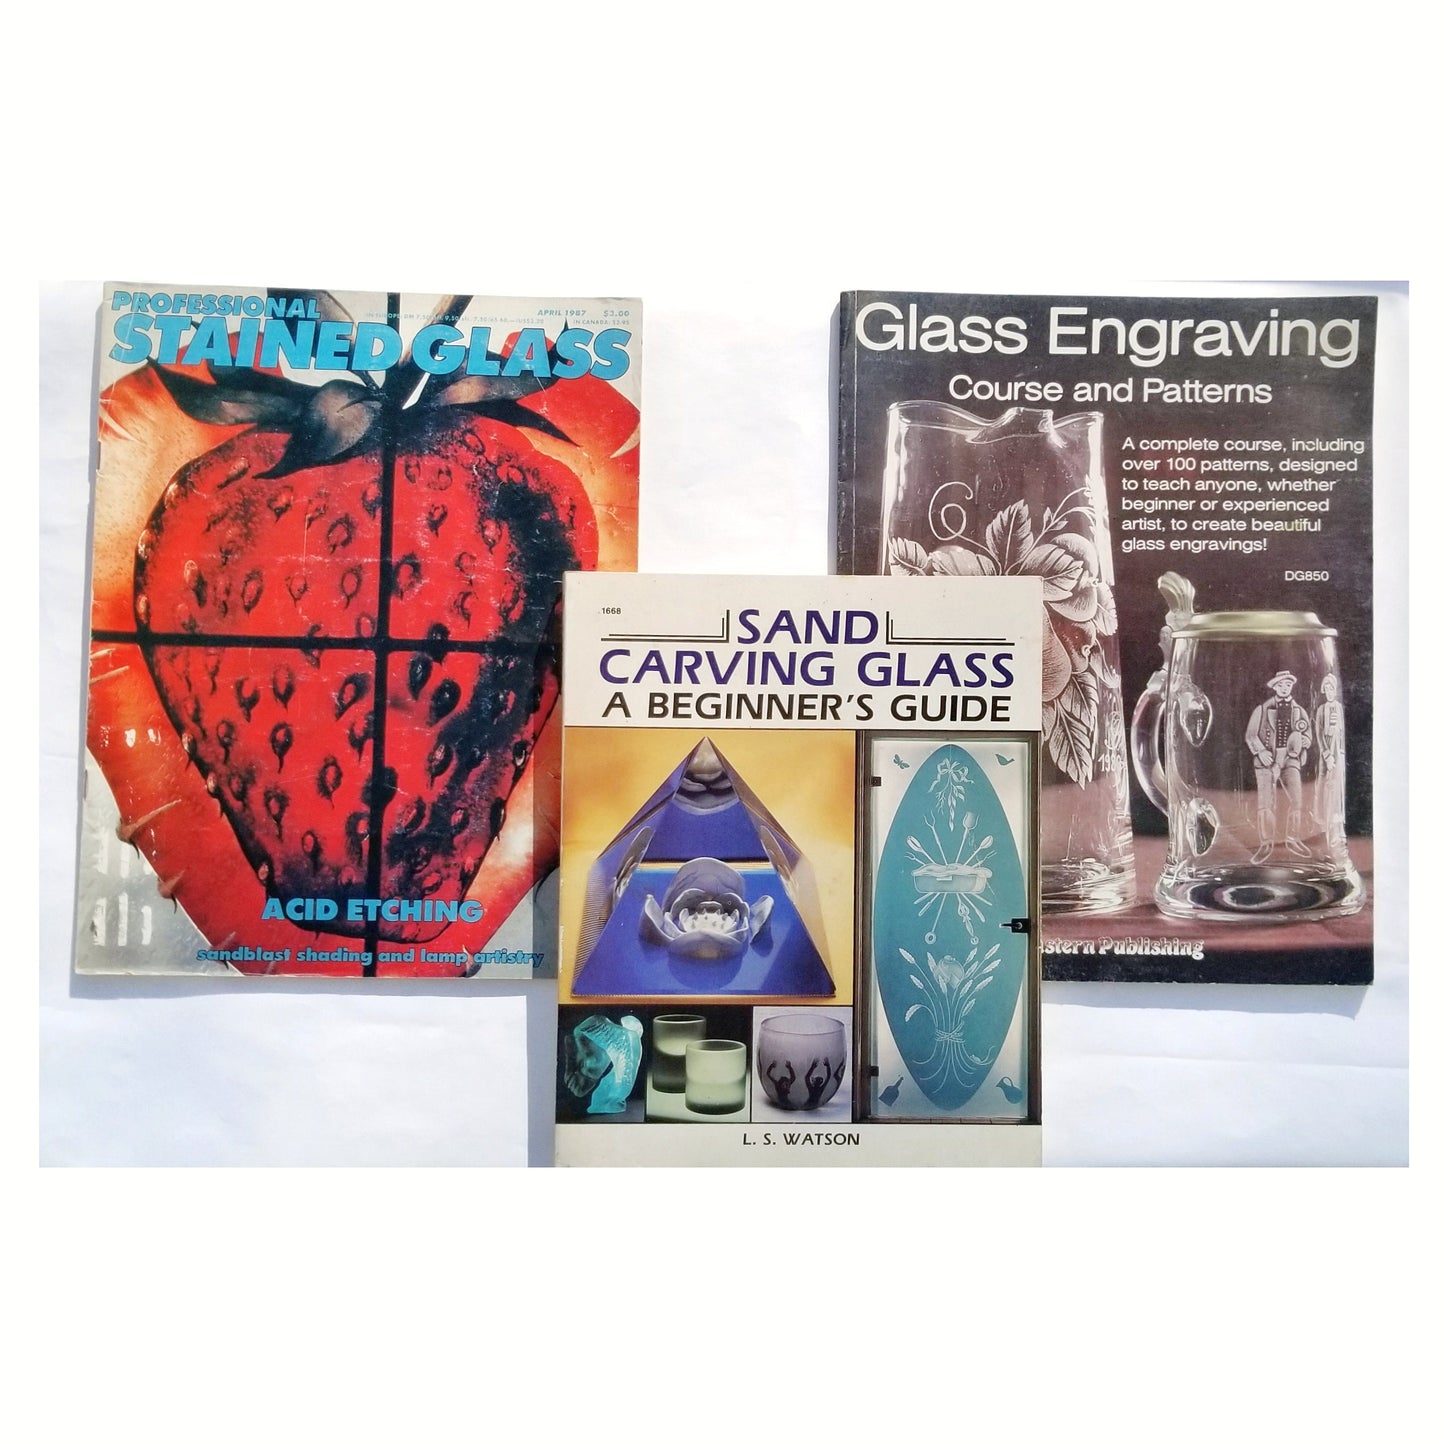 Etched & Sandblasted Glass Patterns. 2 Instruction Books with 1 Magazine. Diy Stemware etching. Used, Vintage, Fair Condition.